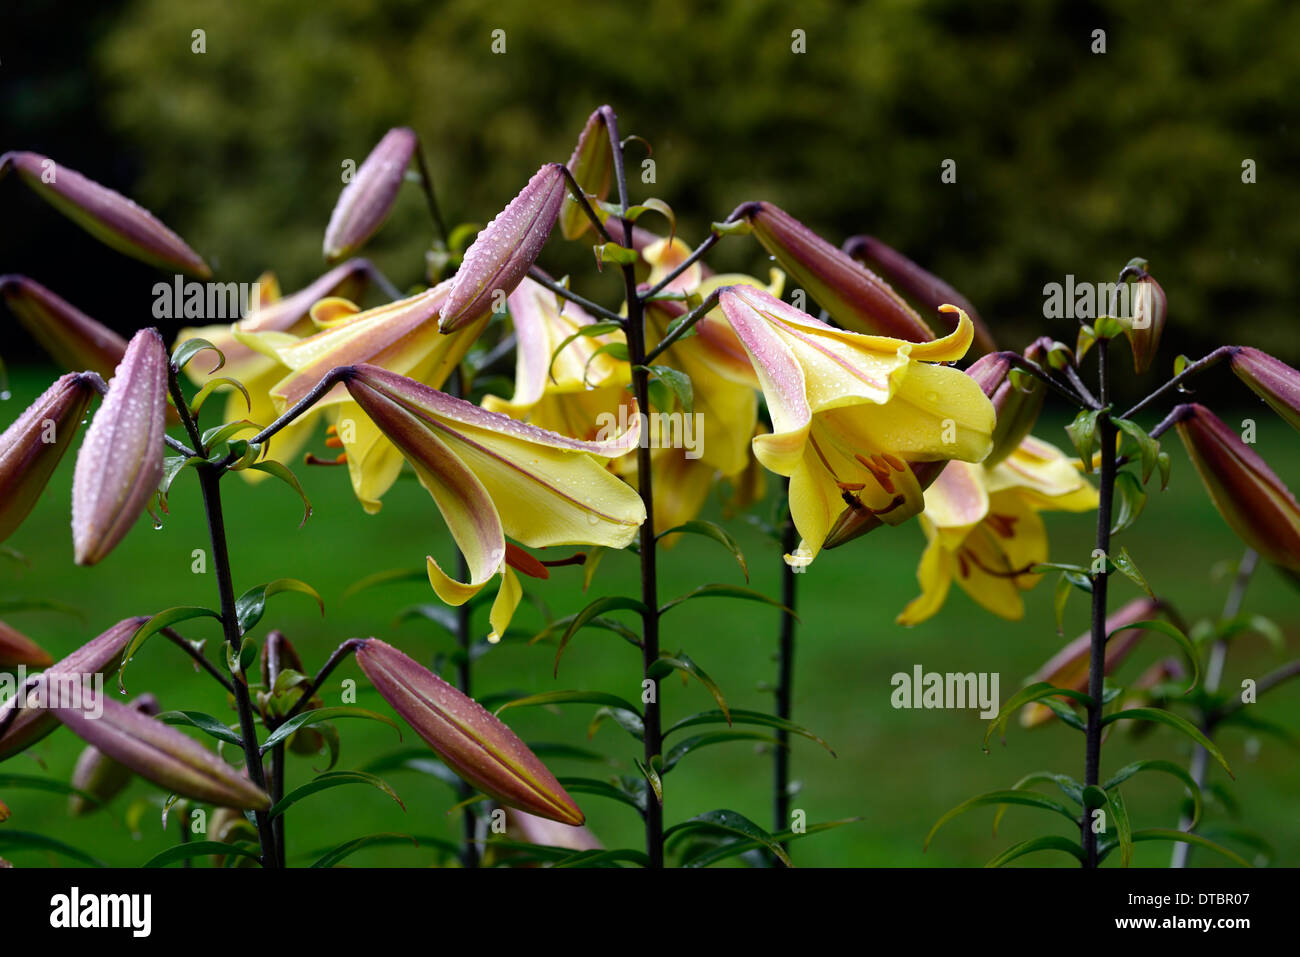 Lilium Golden Splendour trumpet lily lillies yellow red fragrant scented flower flowers blooms blooming Stock Photo